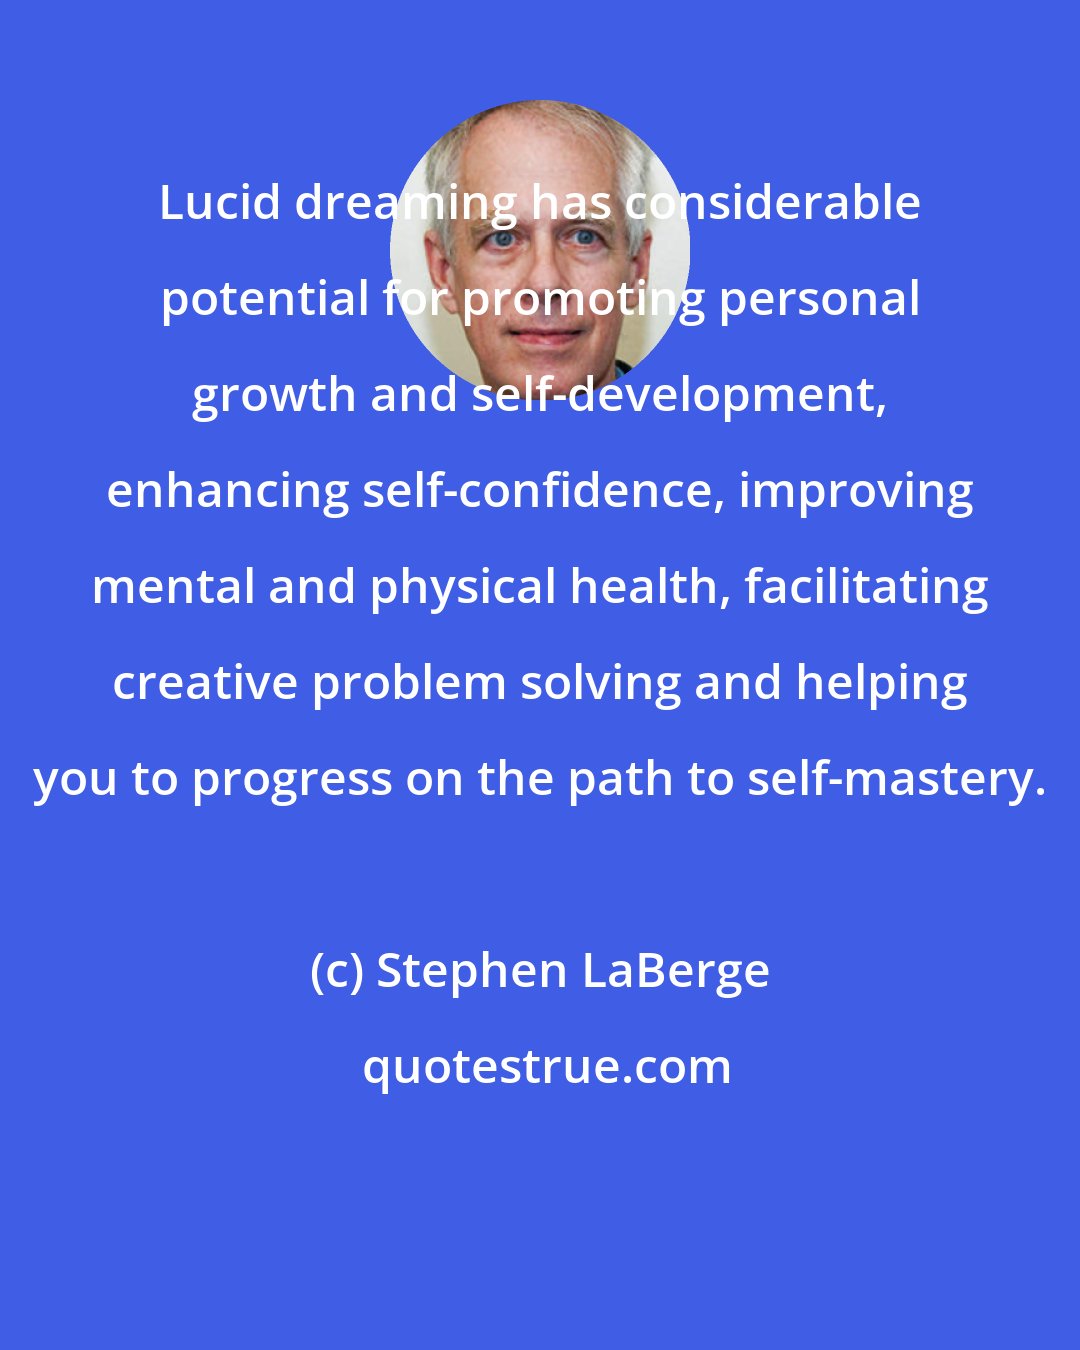 Stephen LaBerge: Lucid dreaming has considerable potential for promoting personal growth and self-development, enhancing self-confidence, improving mental and physical health, facilitating creative problem solving and helping you to progress on the path to self-mastery.